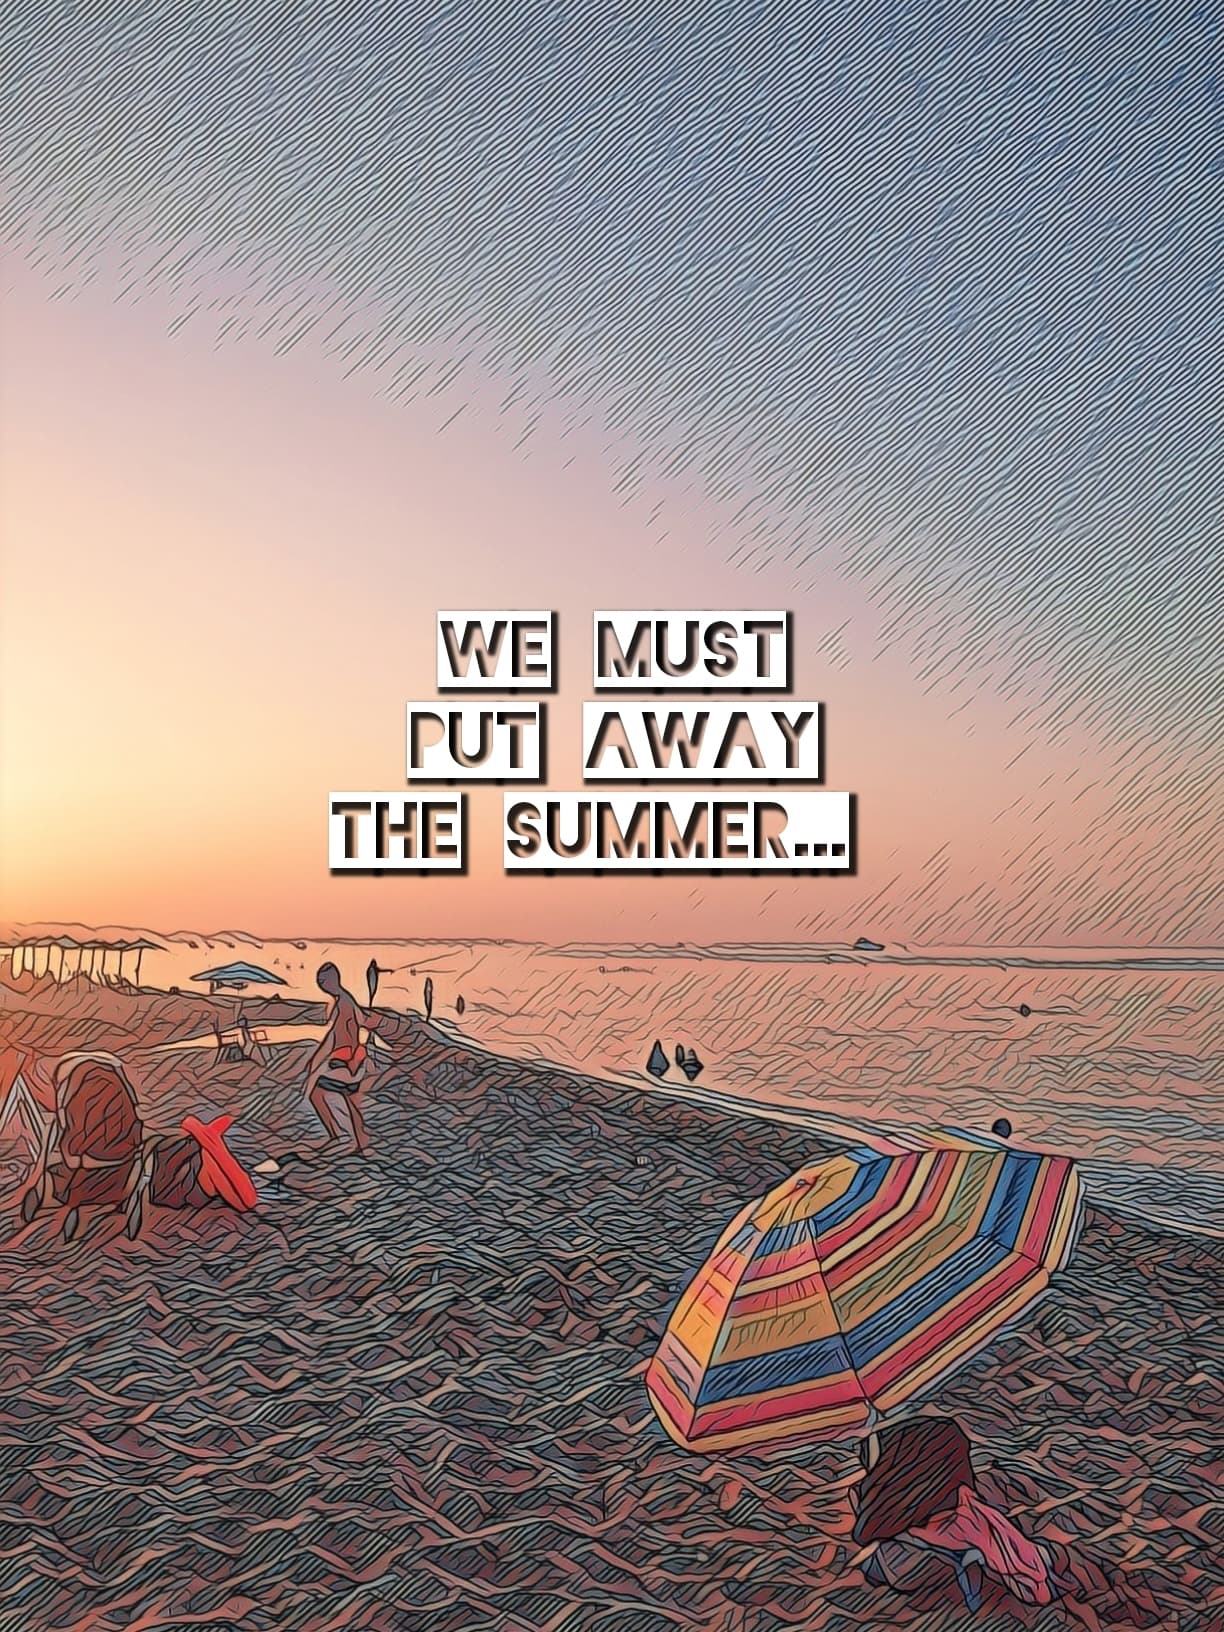 We must put away the summer...